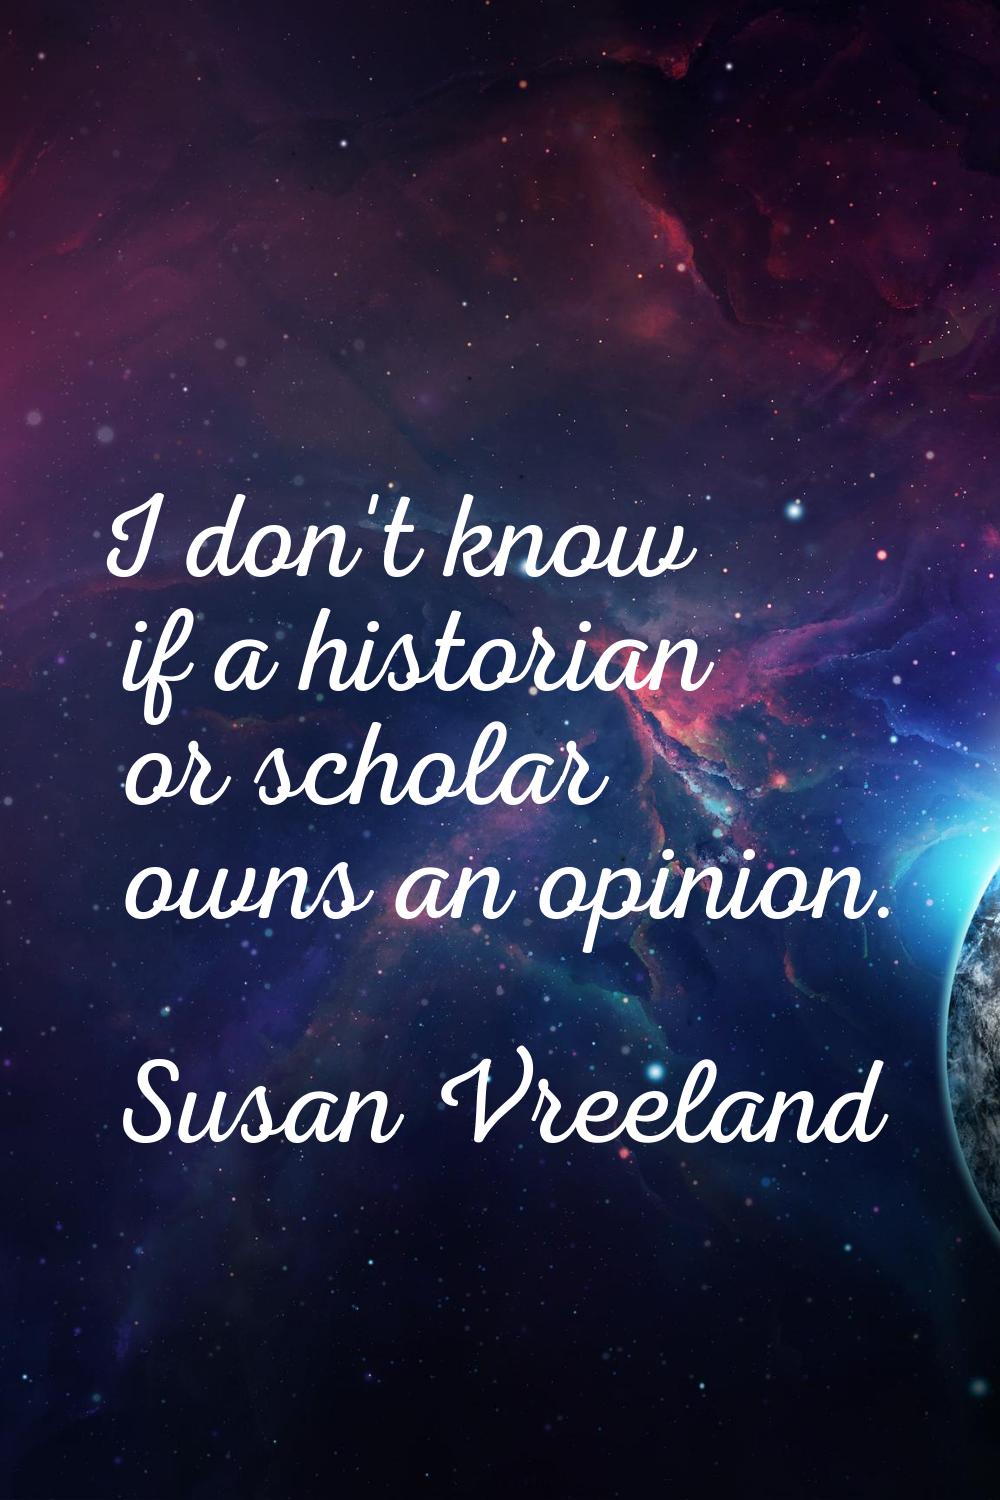 I don't know if a historian or scholar owns an opinion.